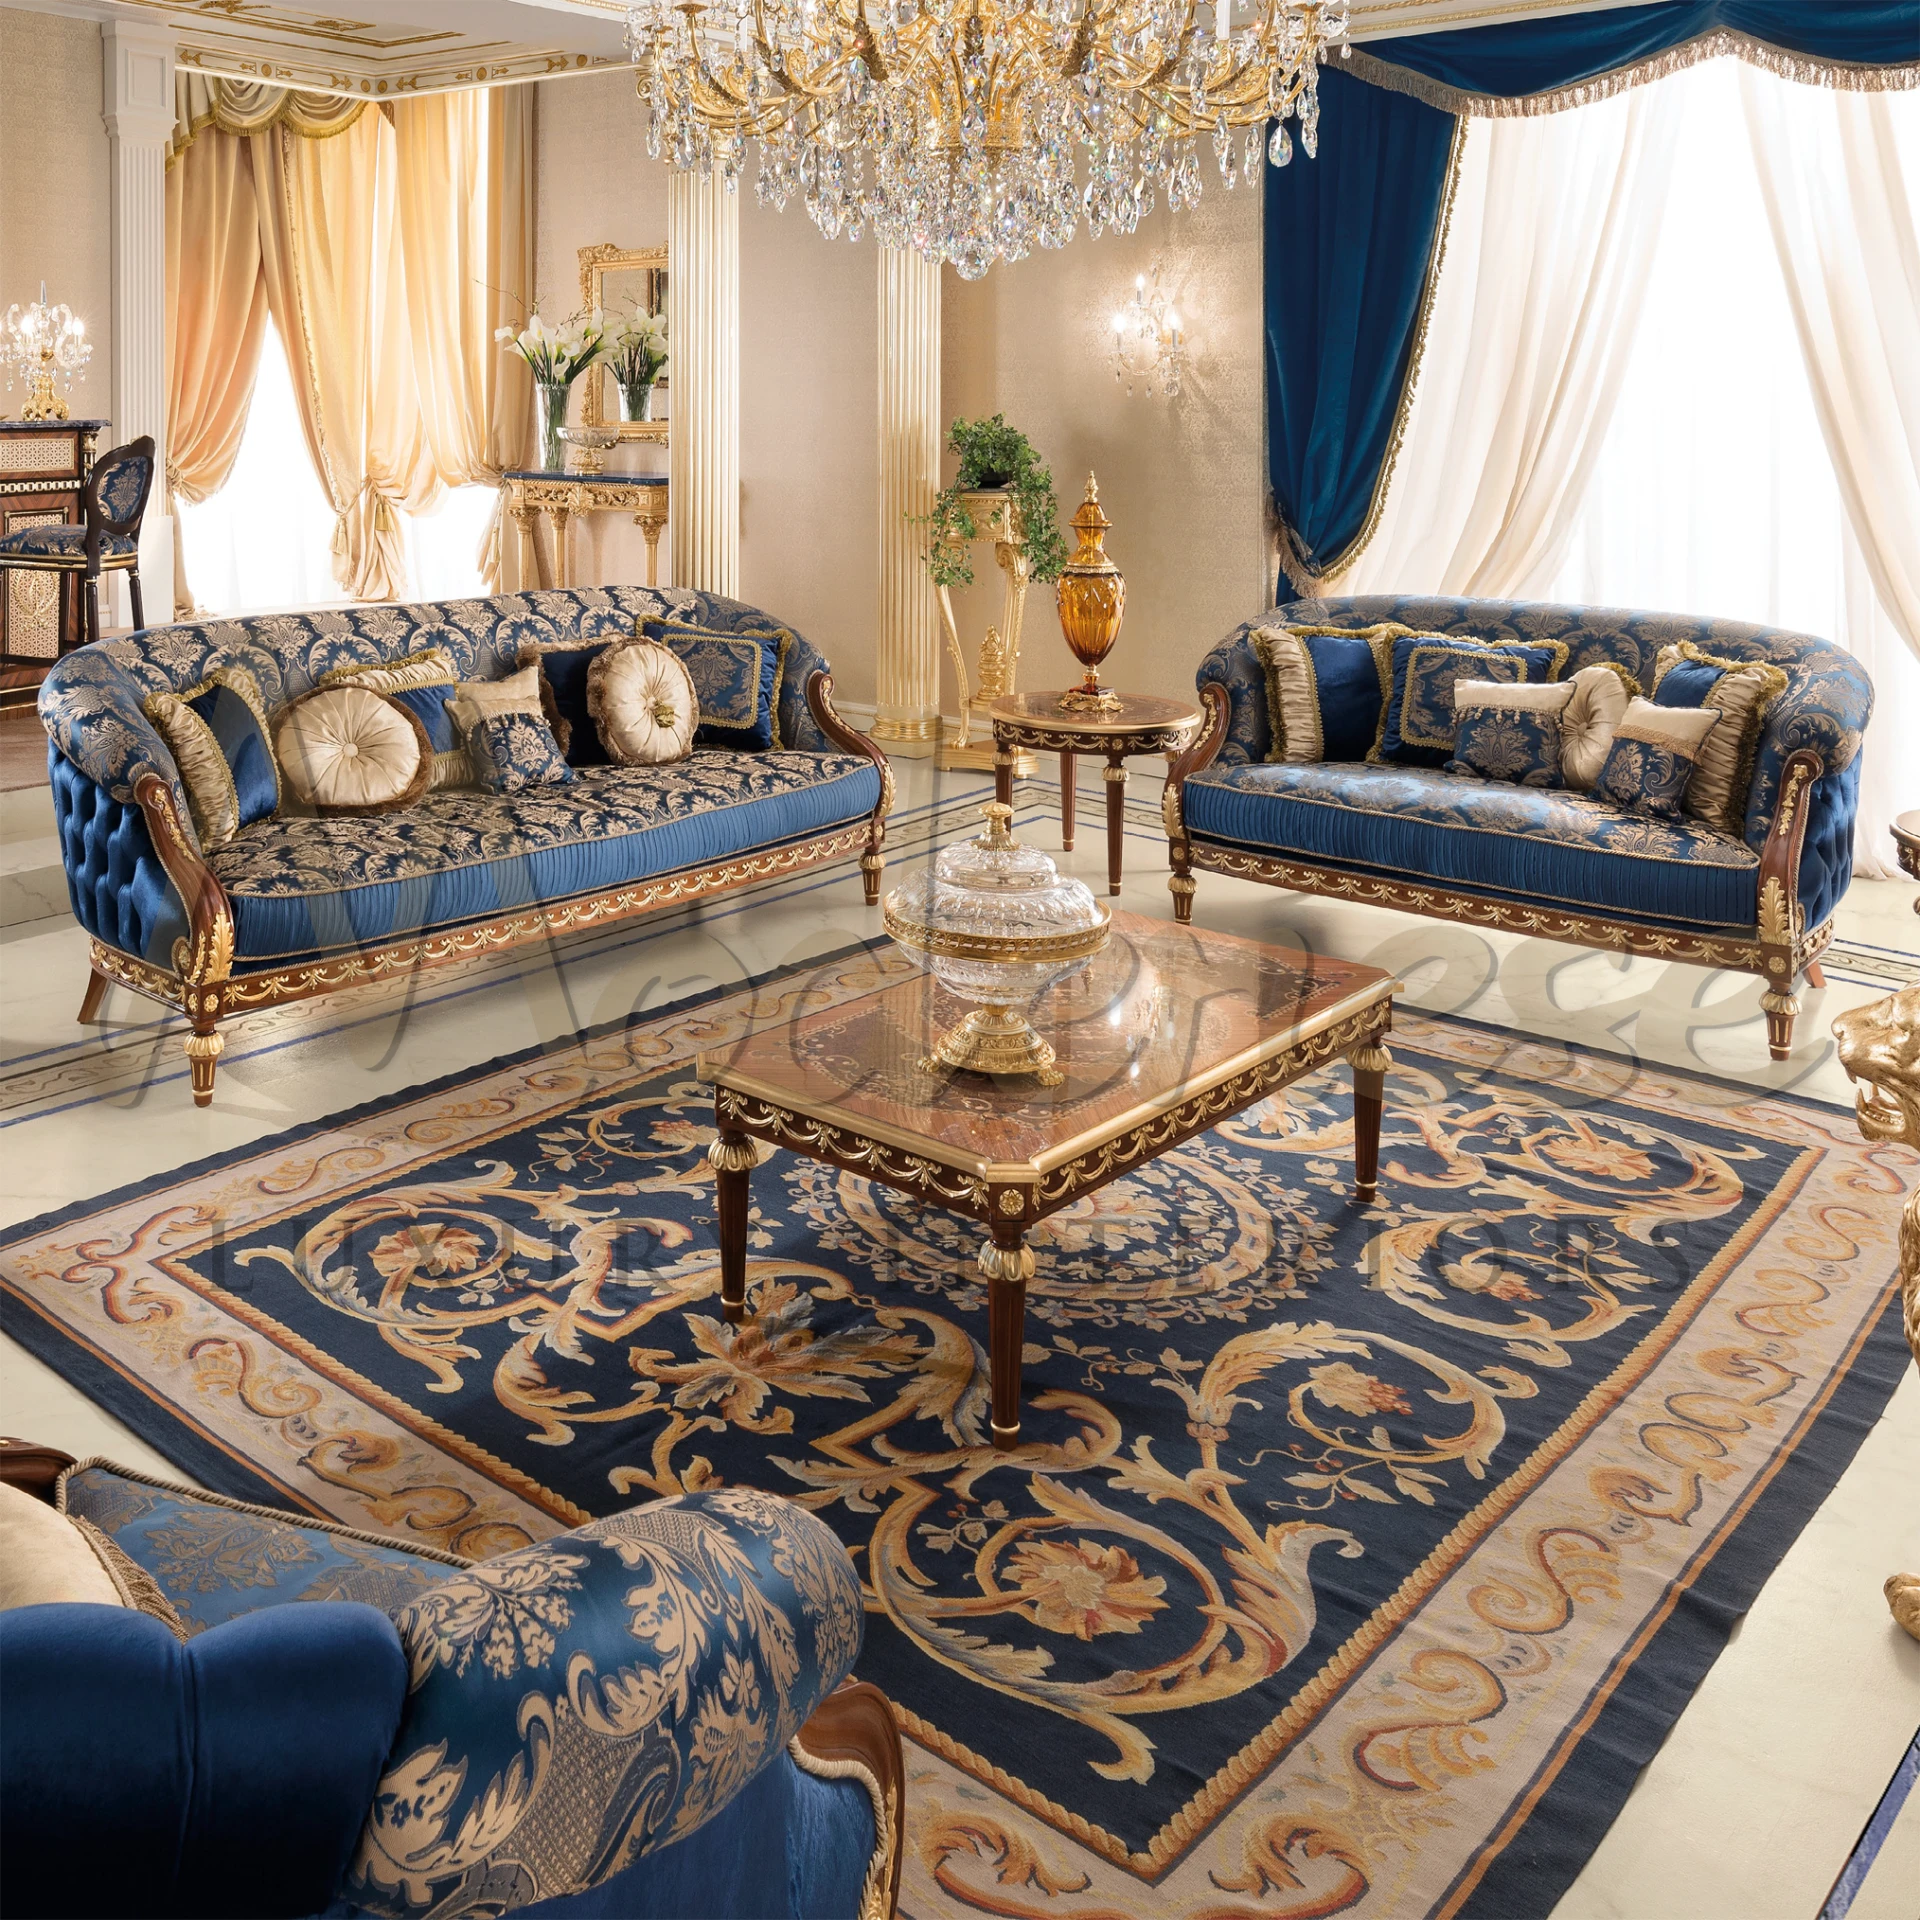 Ornate Baroque Blue Pillow, a symbol of luxury and elegance, with swirling scrolls and rich damask prints from Italy's finest textiles.